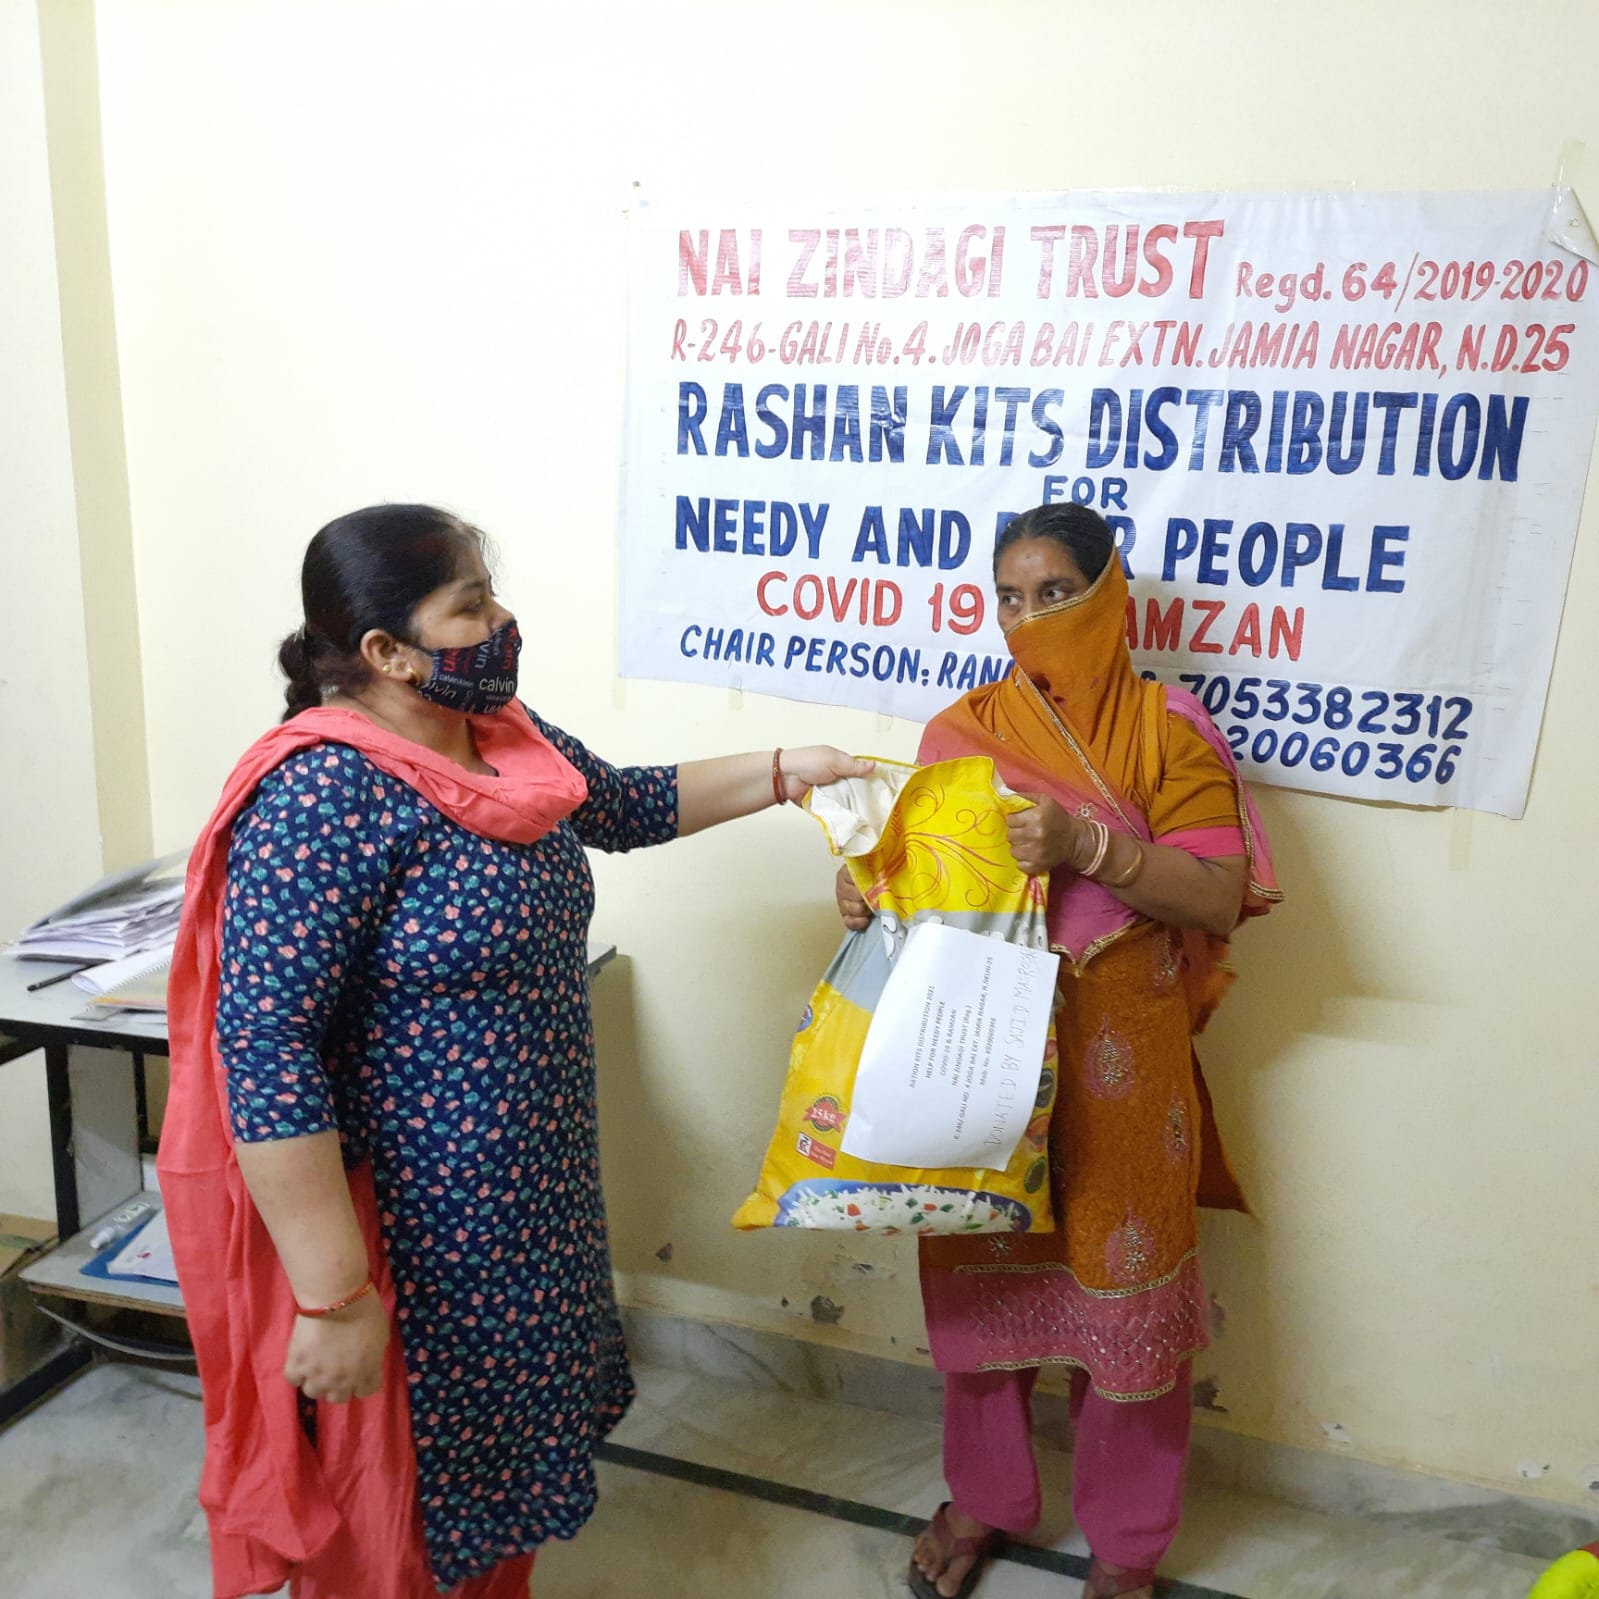 Distribution of rations in the needy by the new Life Trust